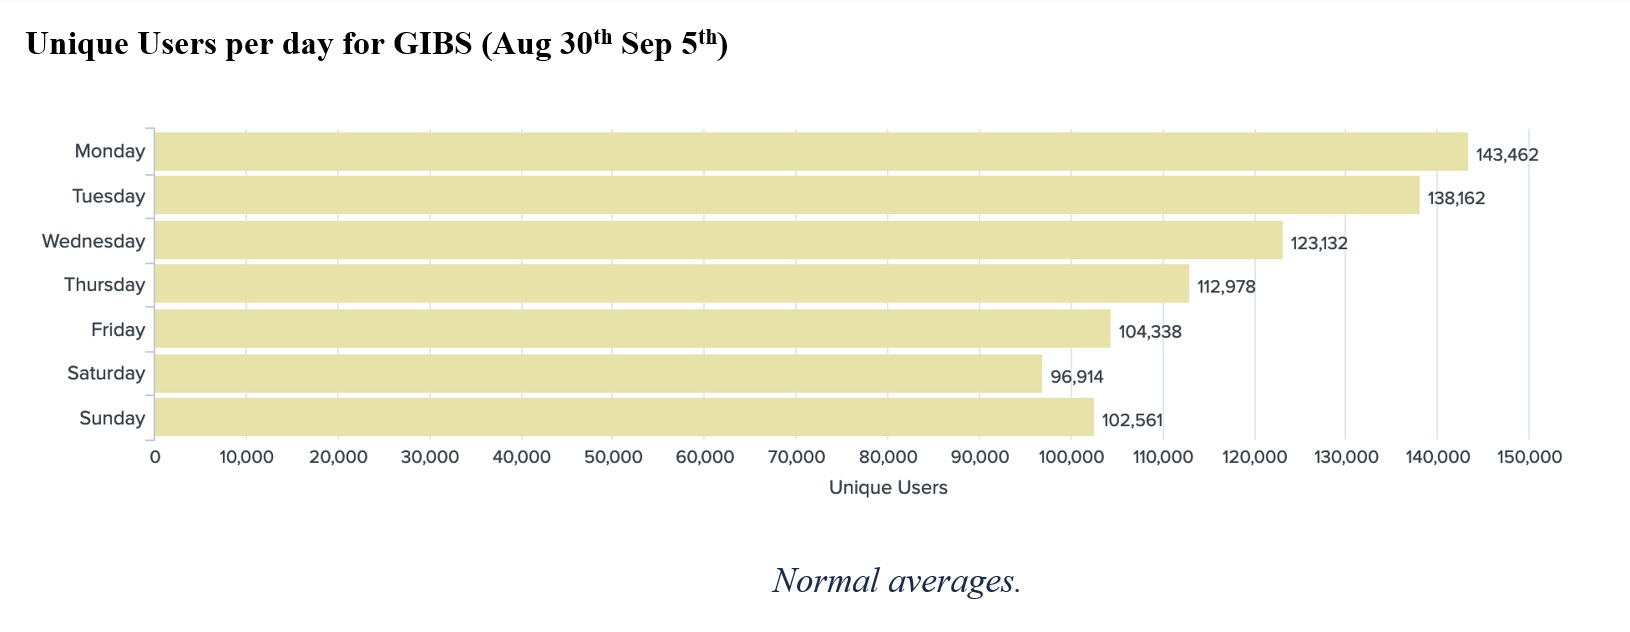 Chart of GIBS unique users by day Aug 30 - Sep 5, 2021